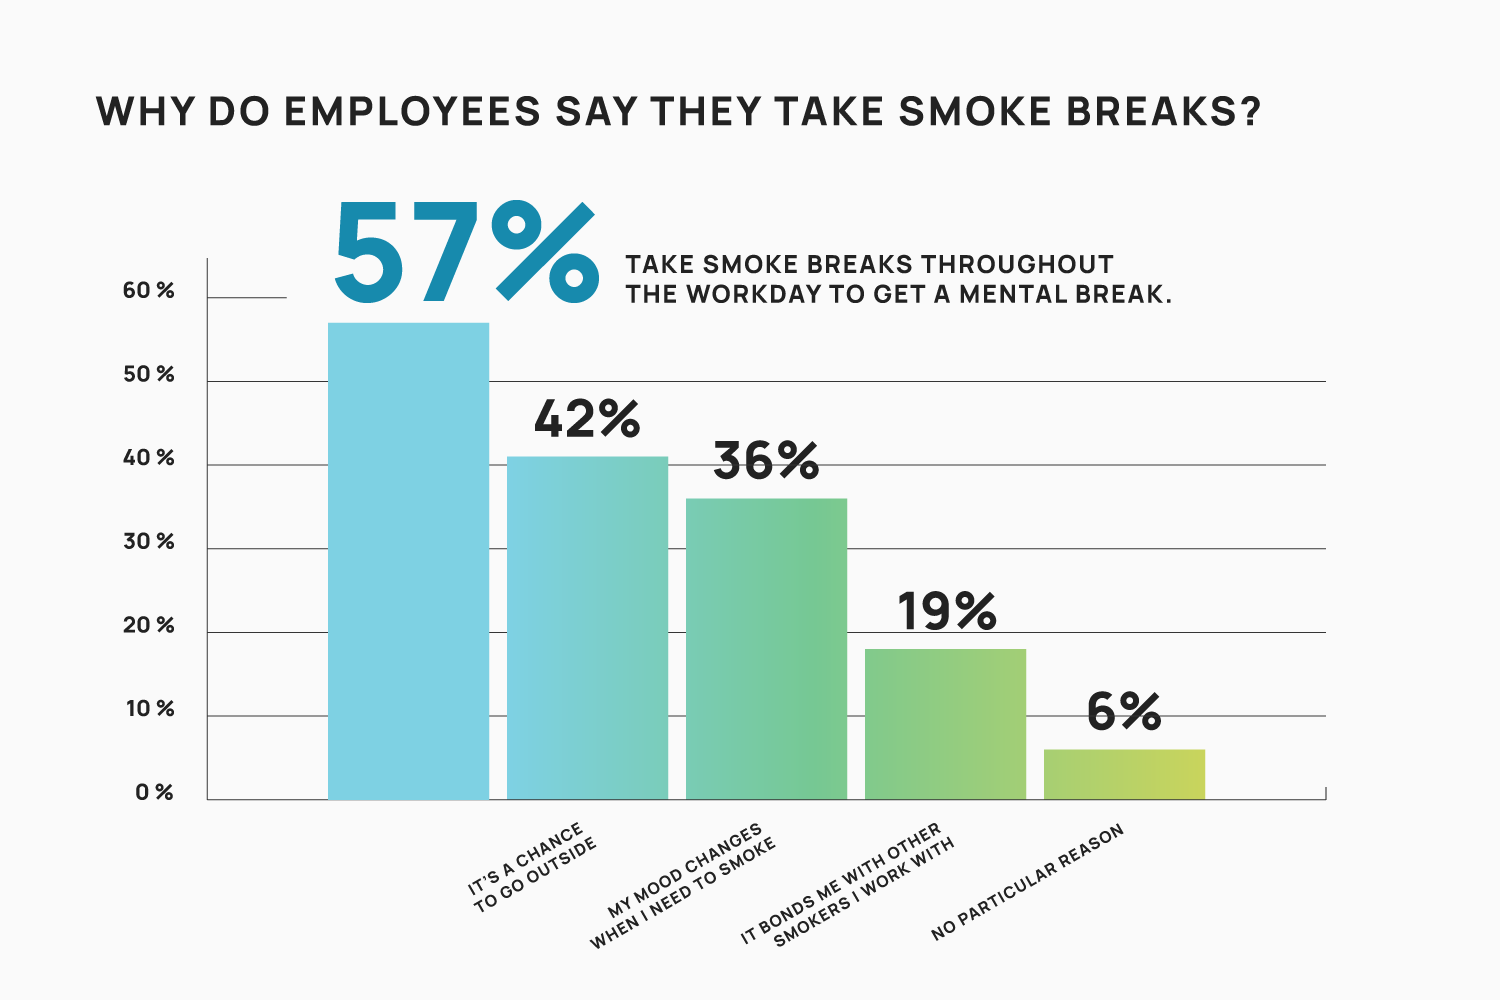 Graph 1: Why do employees say they take smoke breaks? 